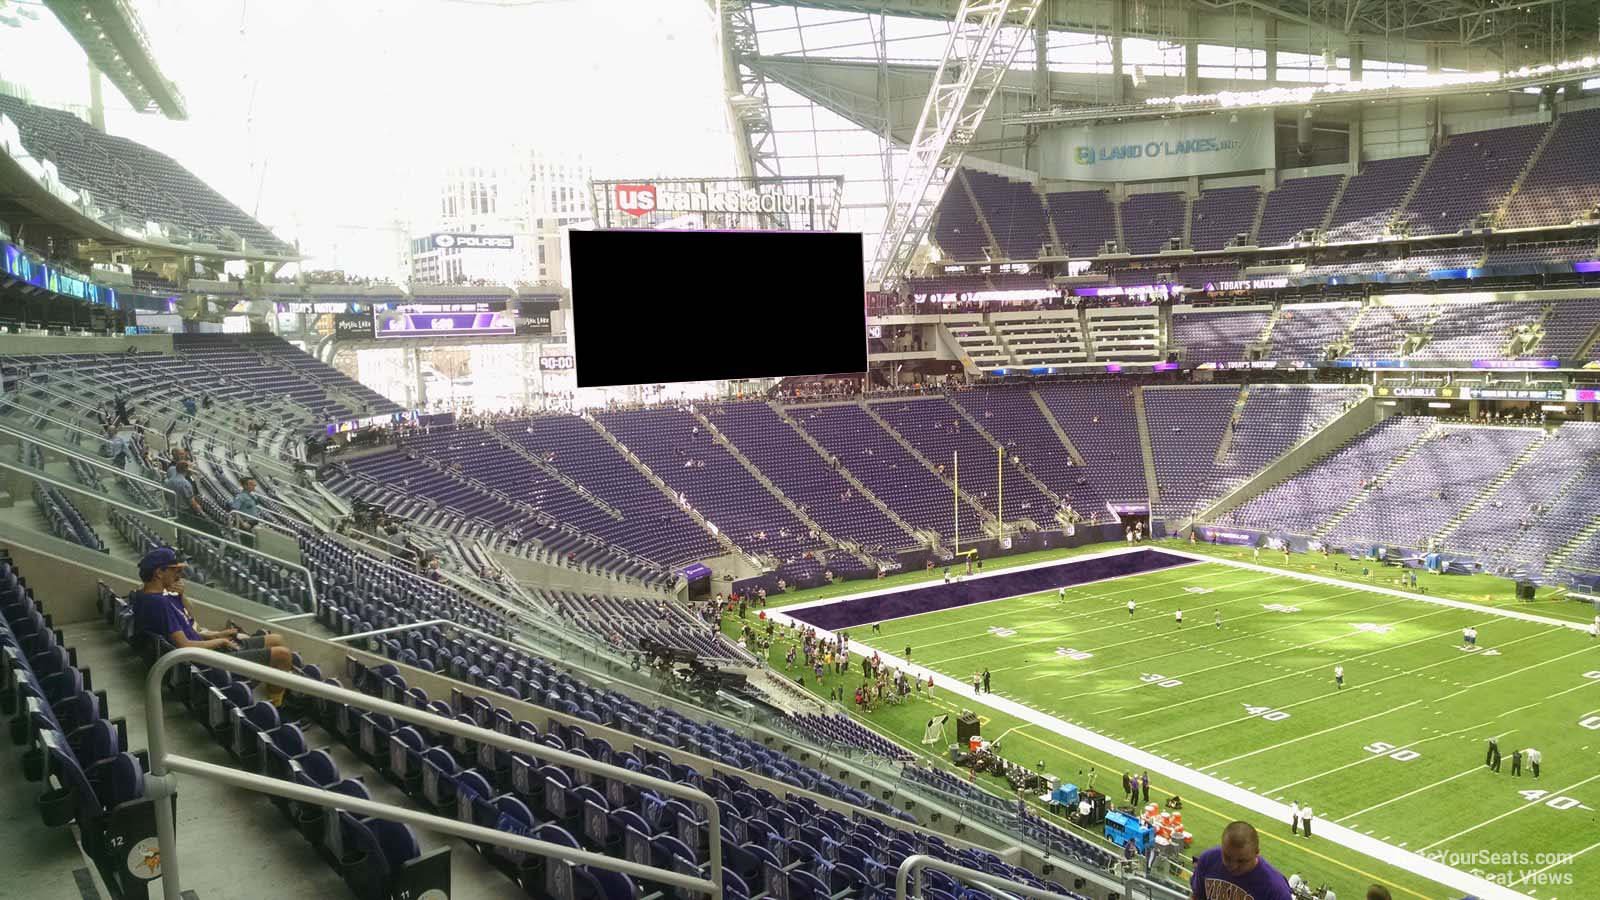 section 230, row 13 seat view  for football - u.s. bank stadium